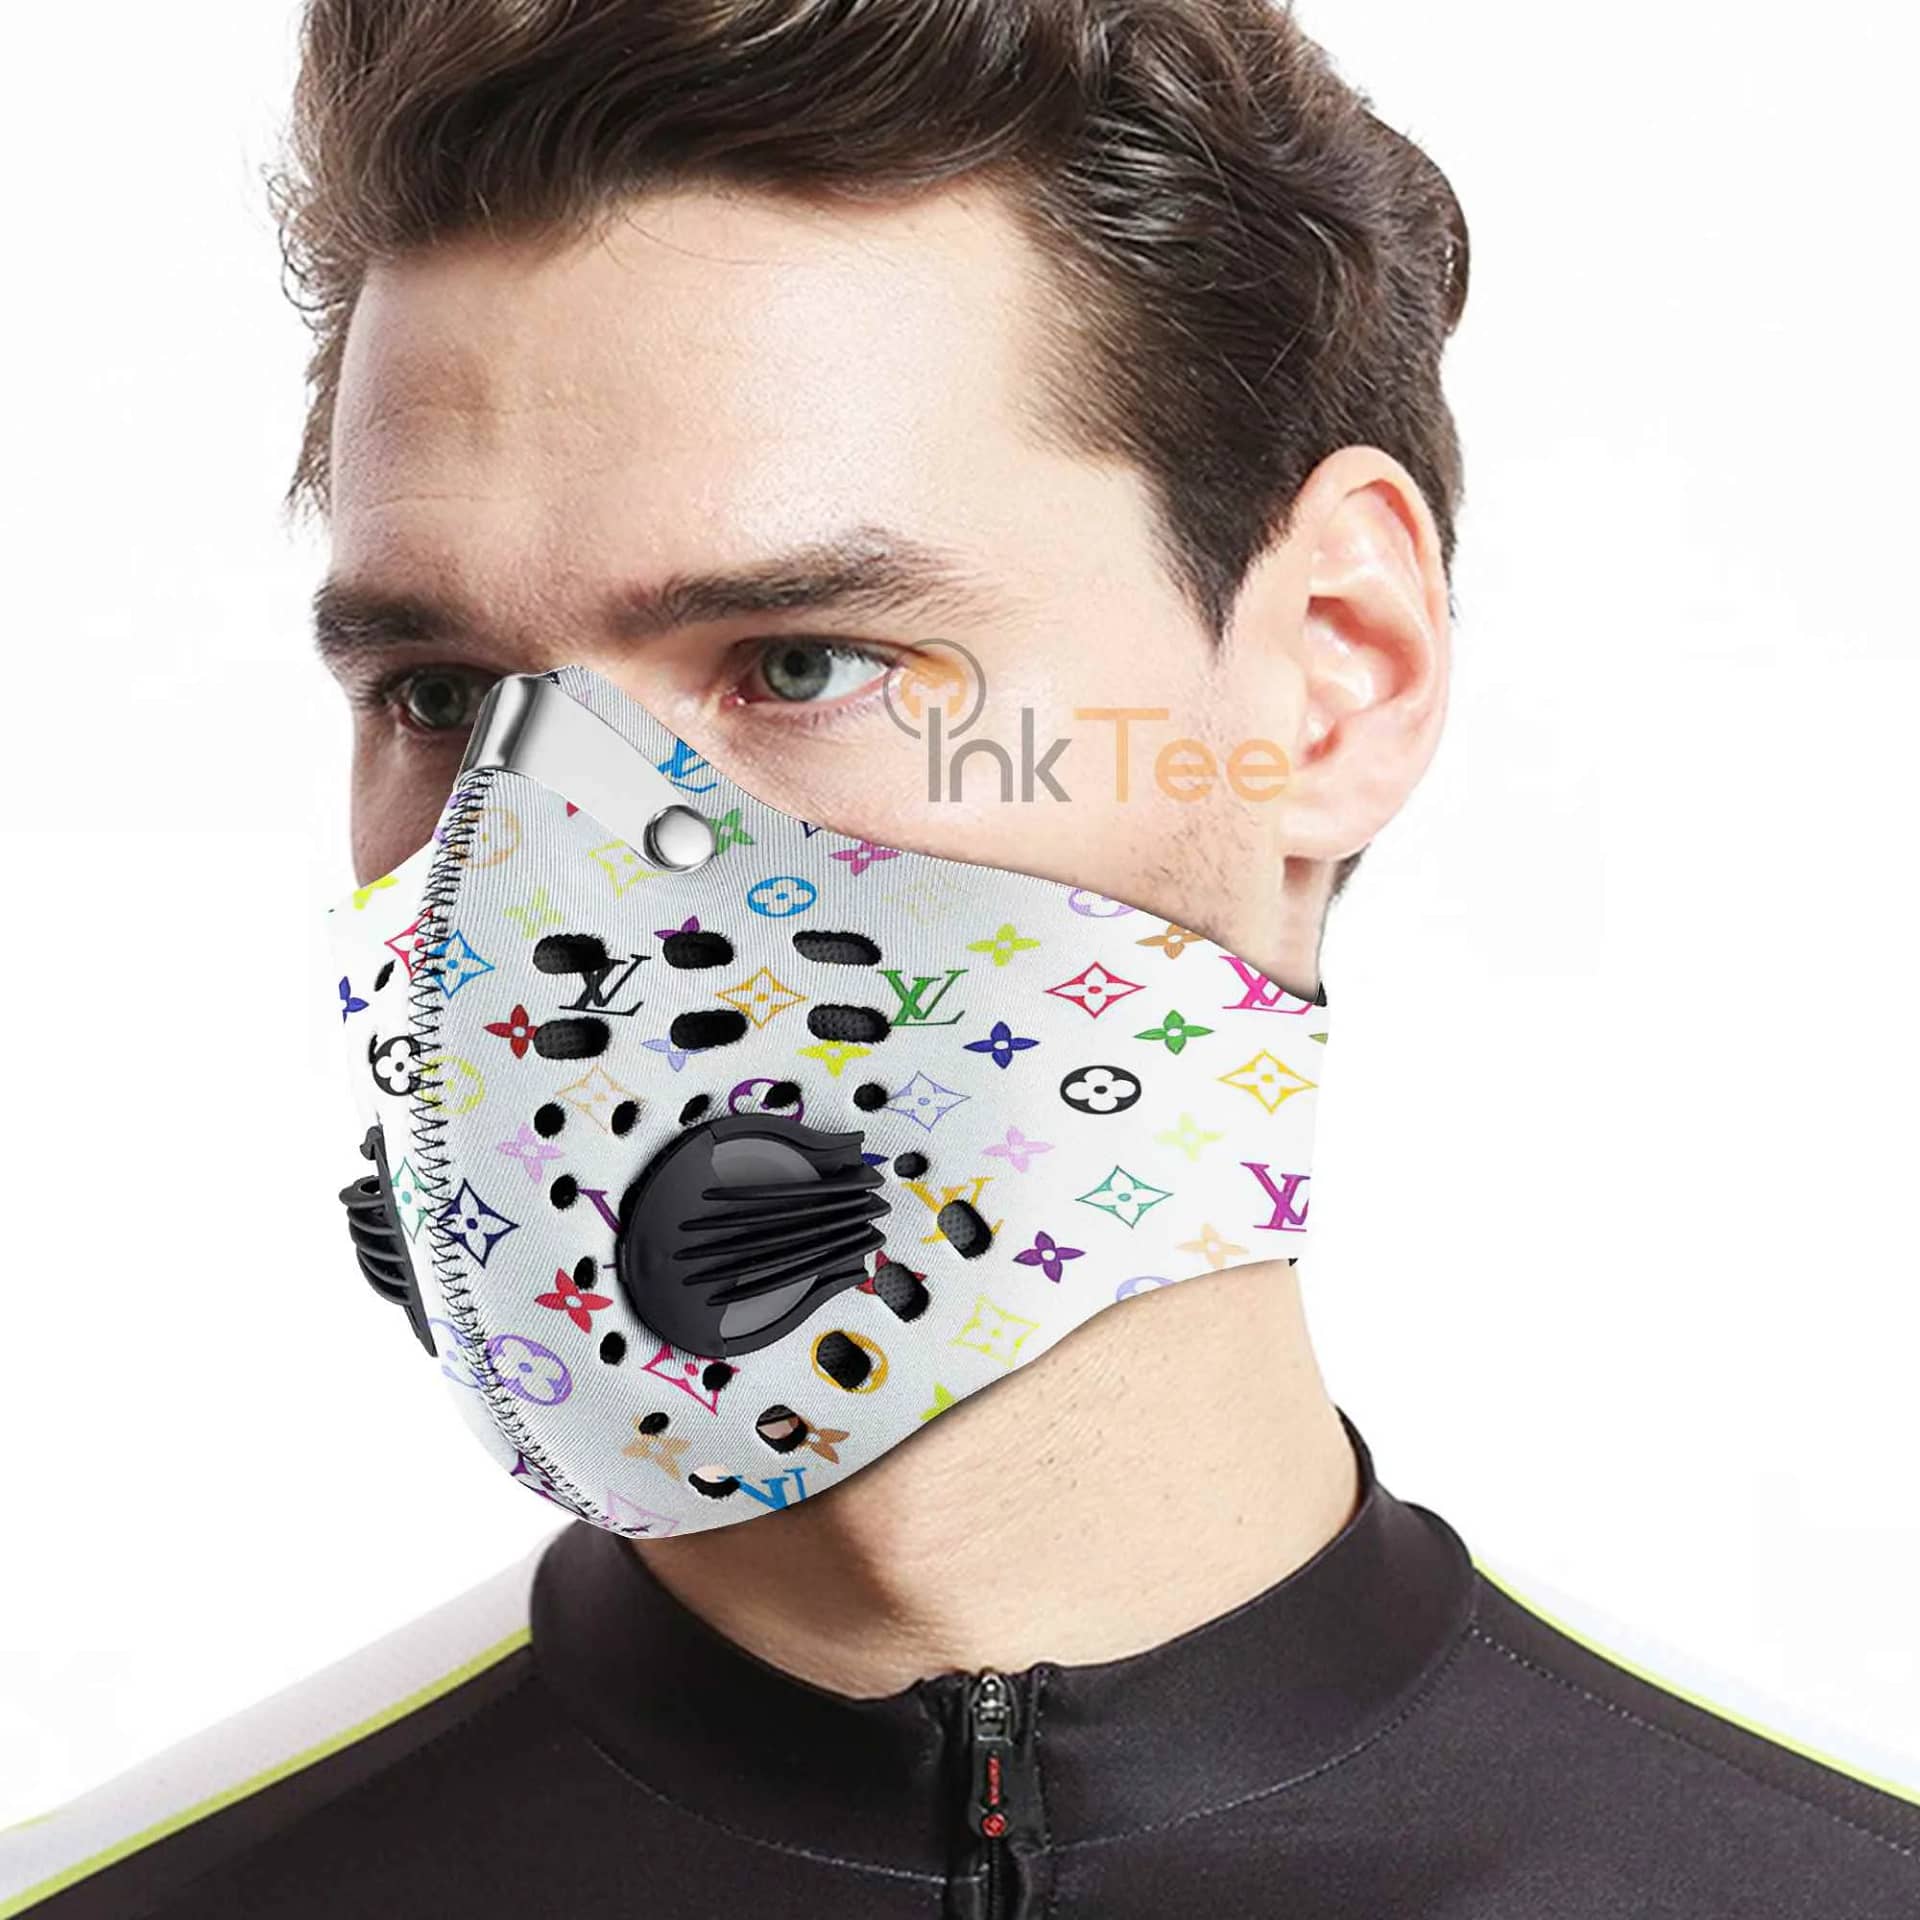 Amazon Best Selling Luis Vuitton Sku 220 Filter Activated Carbon Pm 2.5 Face Mask